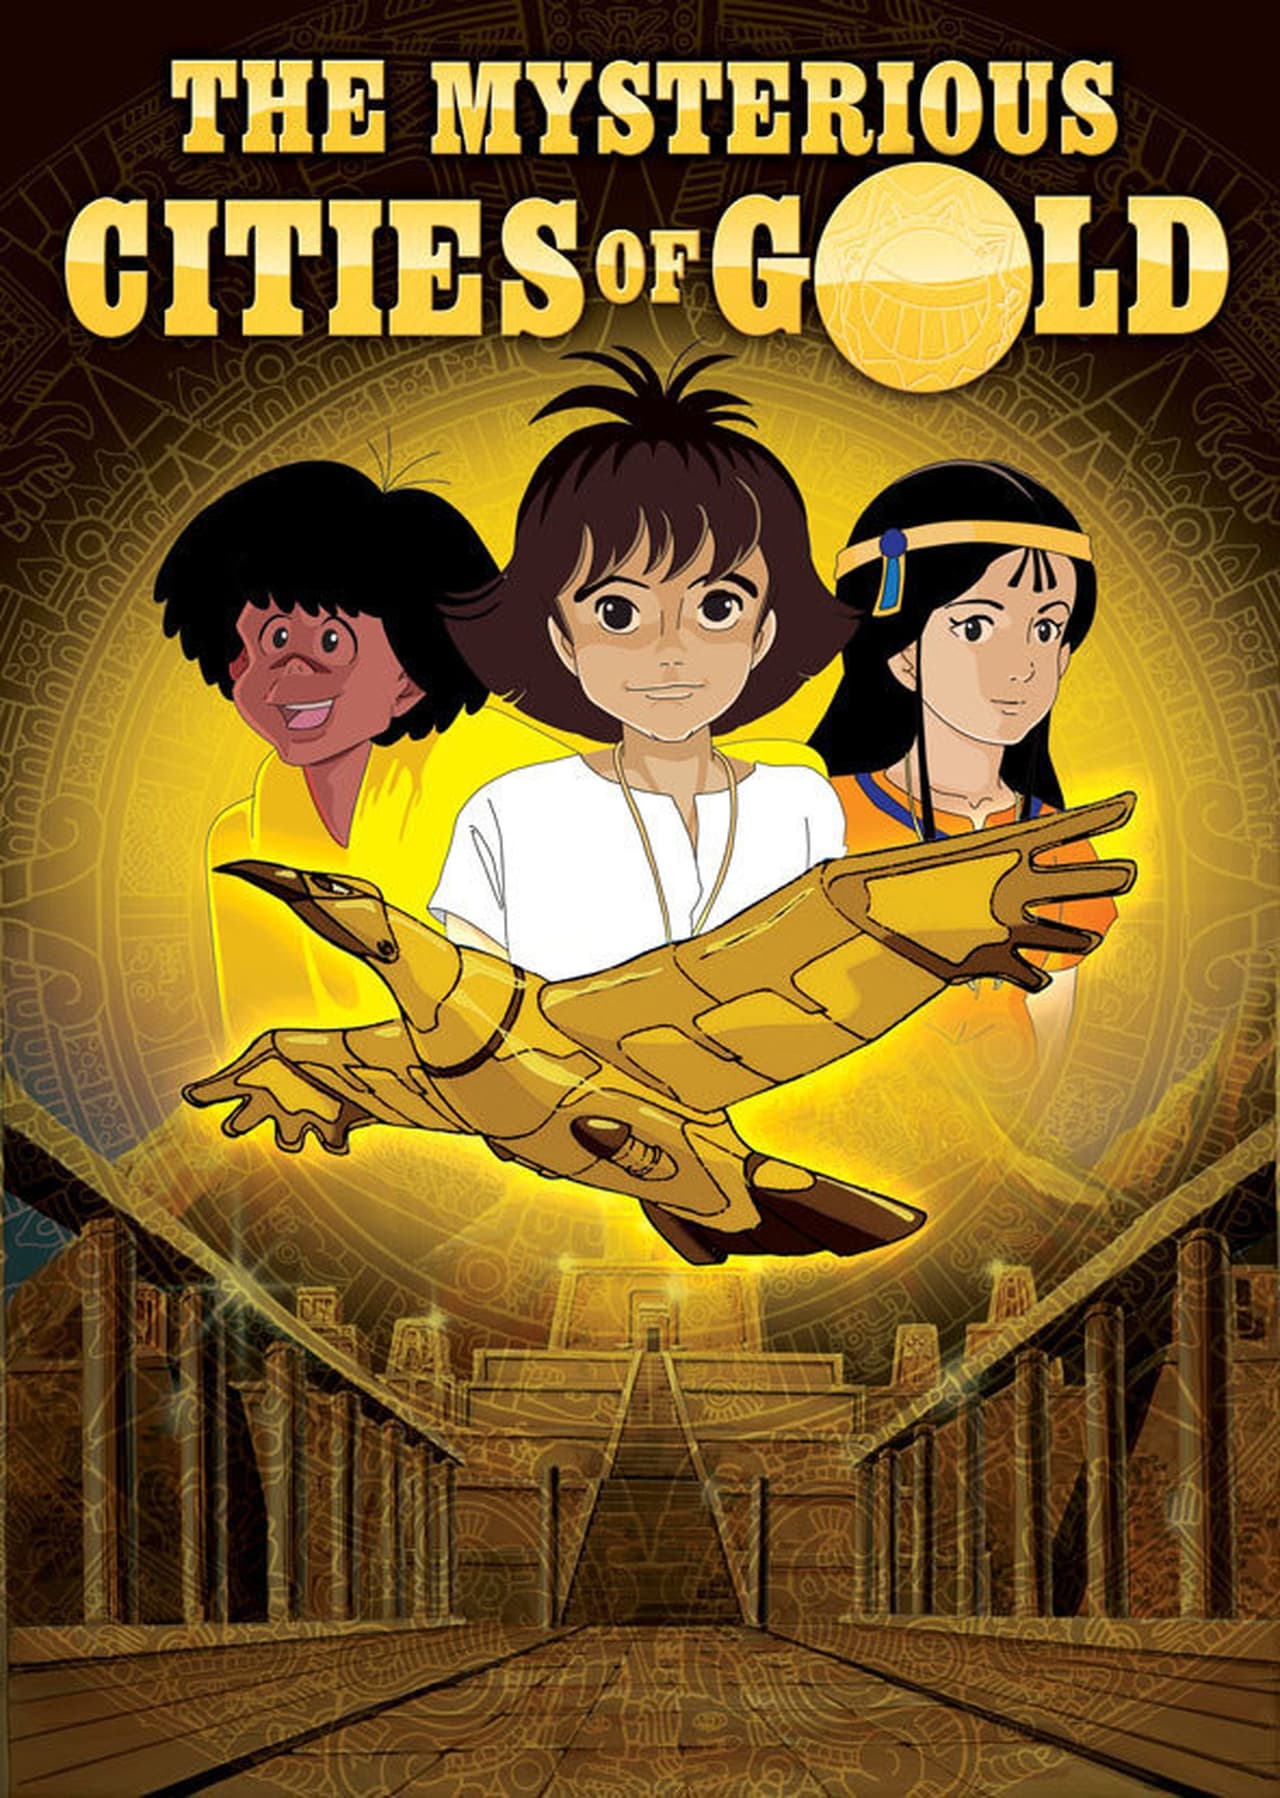 The Mysterious Cities of Gold Esteban, Child of the Sun (TV Episode 1982)  - IMDb